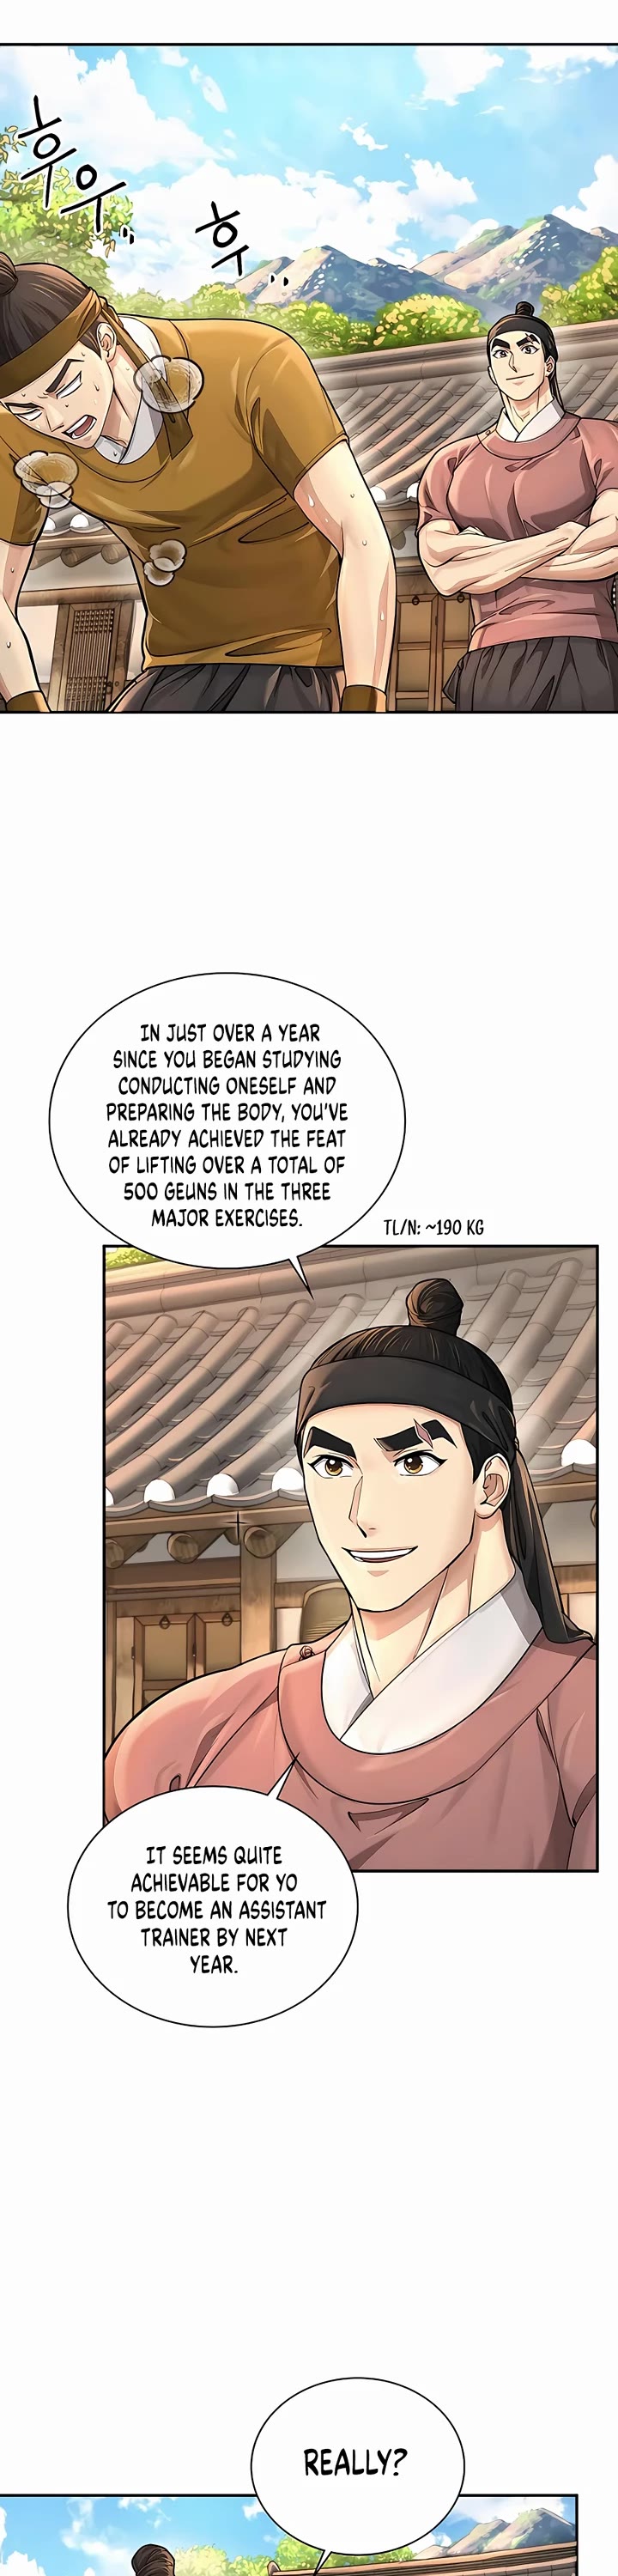 Muscle Joseon - Page 2